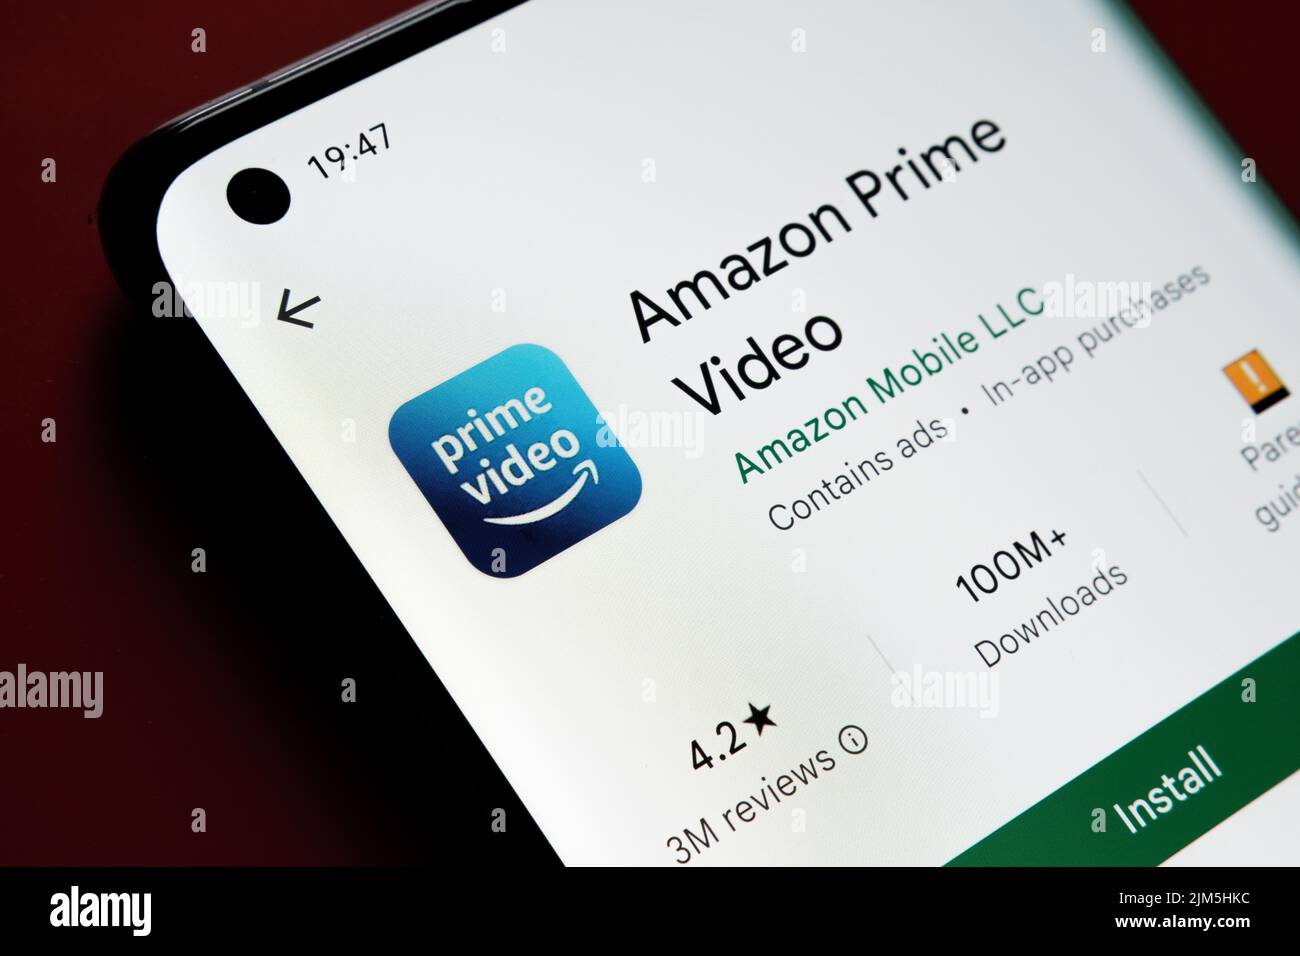 amazon prime video app seen in Google Play Store on the smartphone screen placed on red background. Close up photo with selective focus. Stafford, Uni Stock Photo